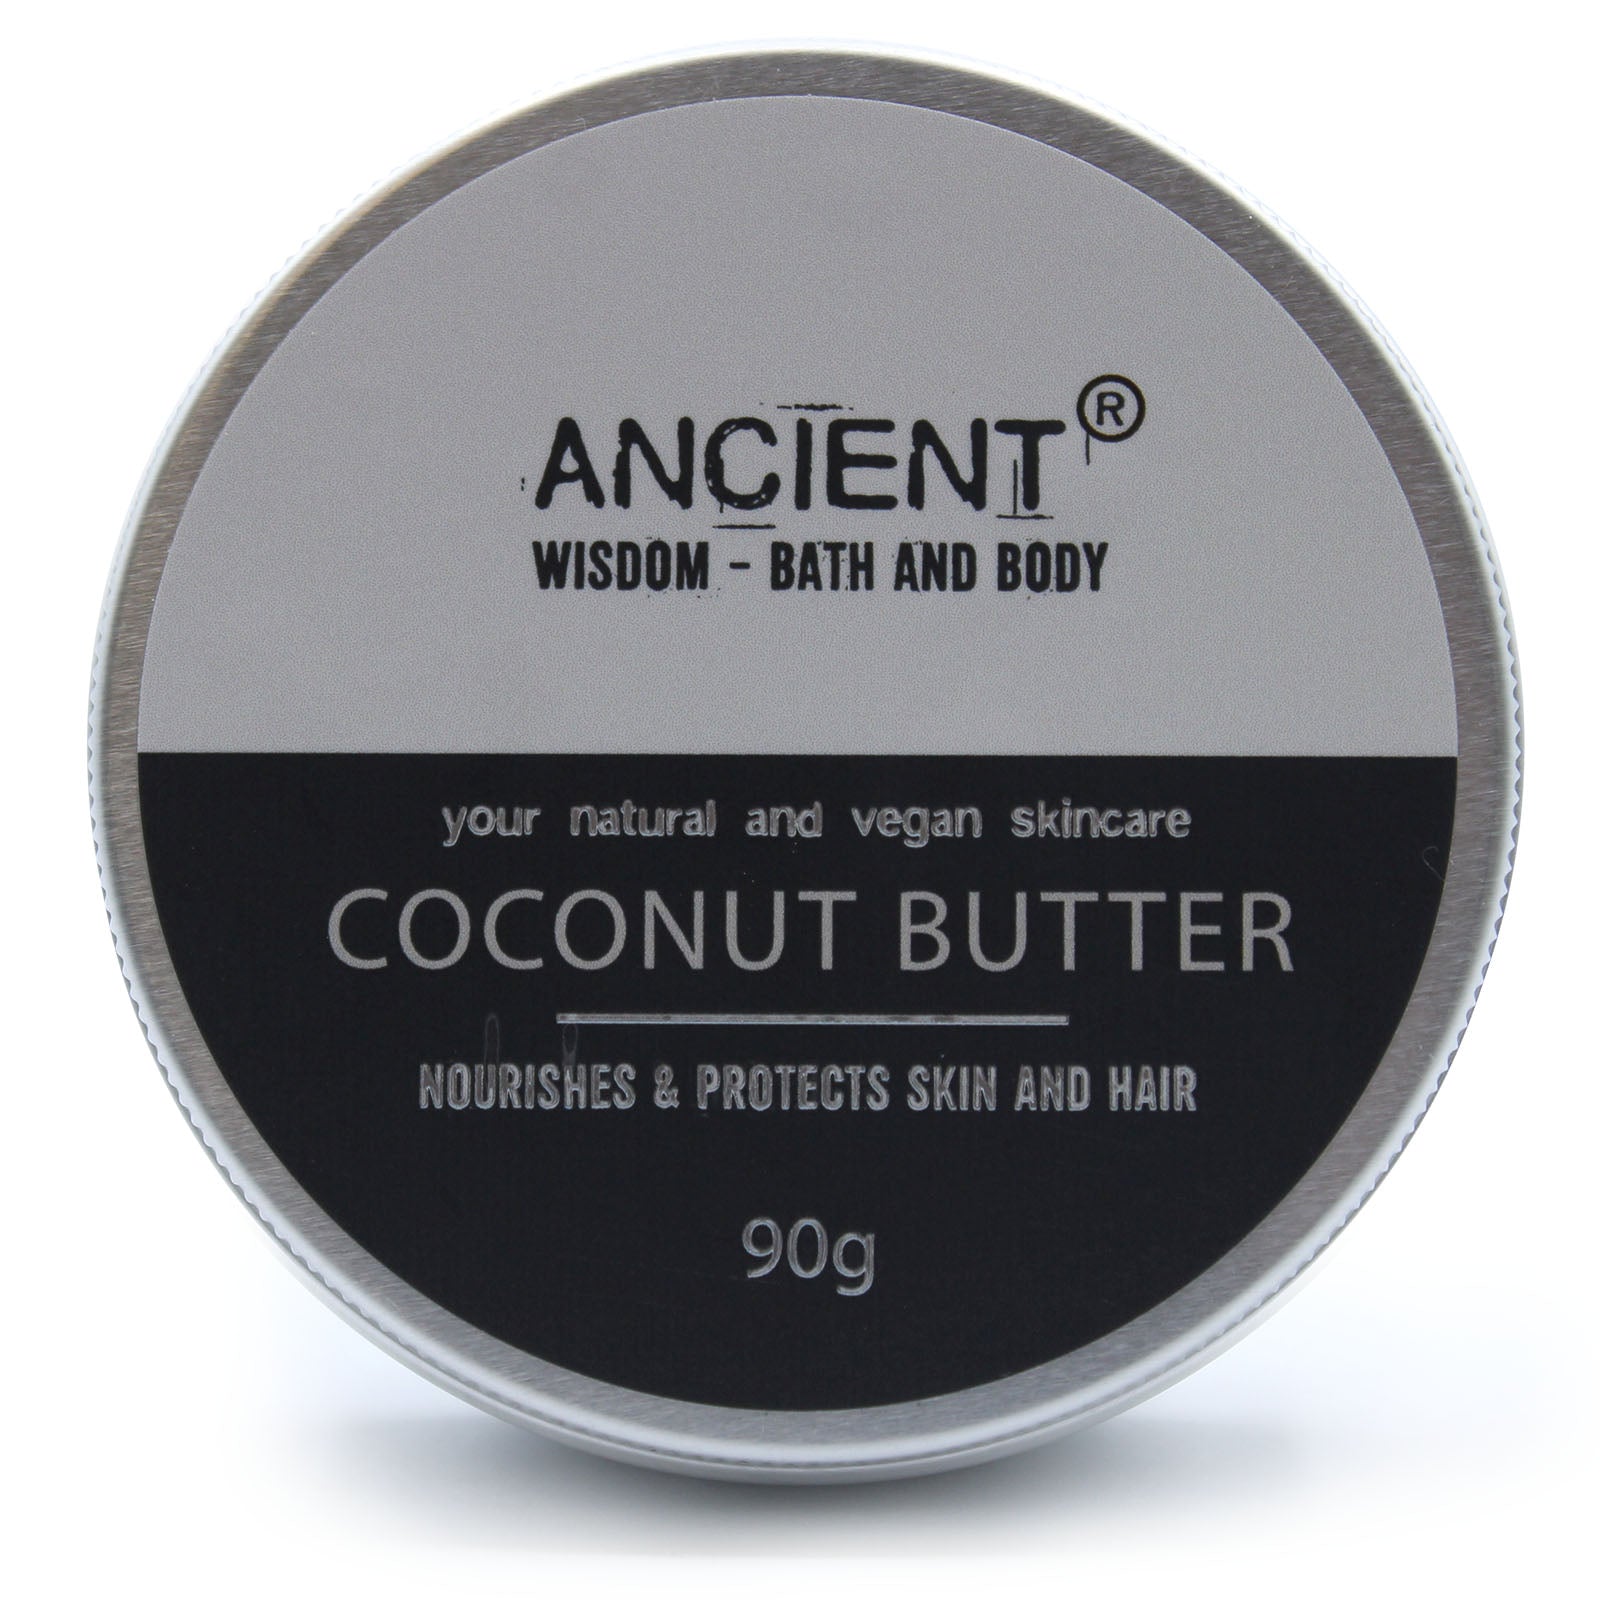 View Pure Body Butter 90g Coconut Butter information